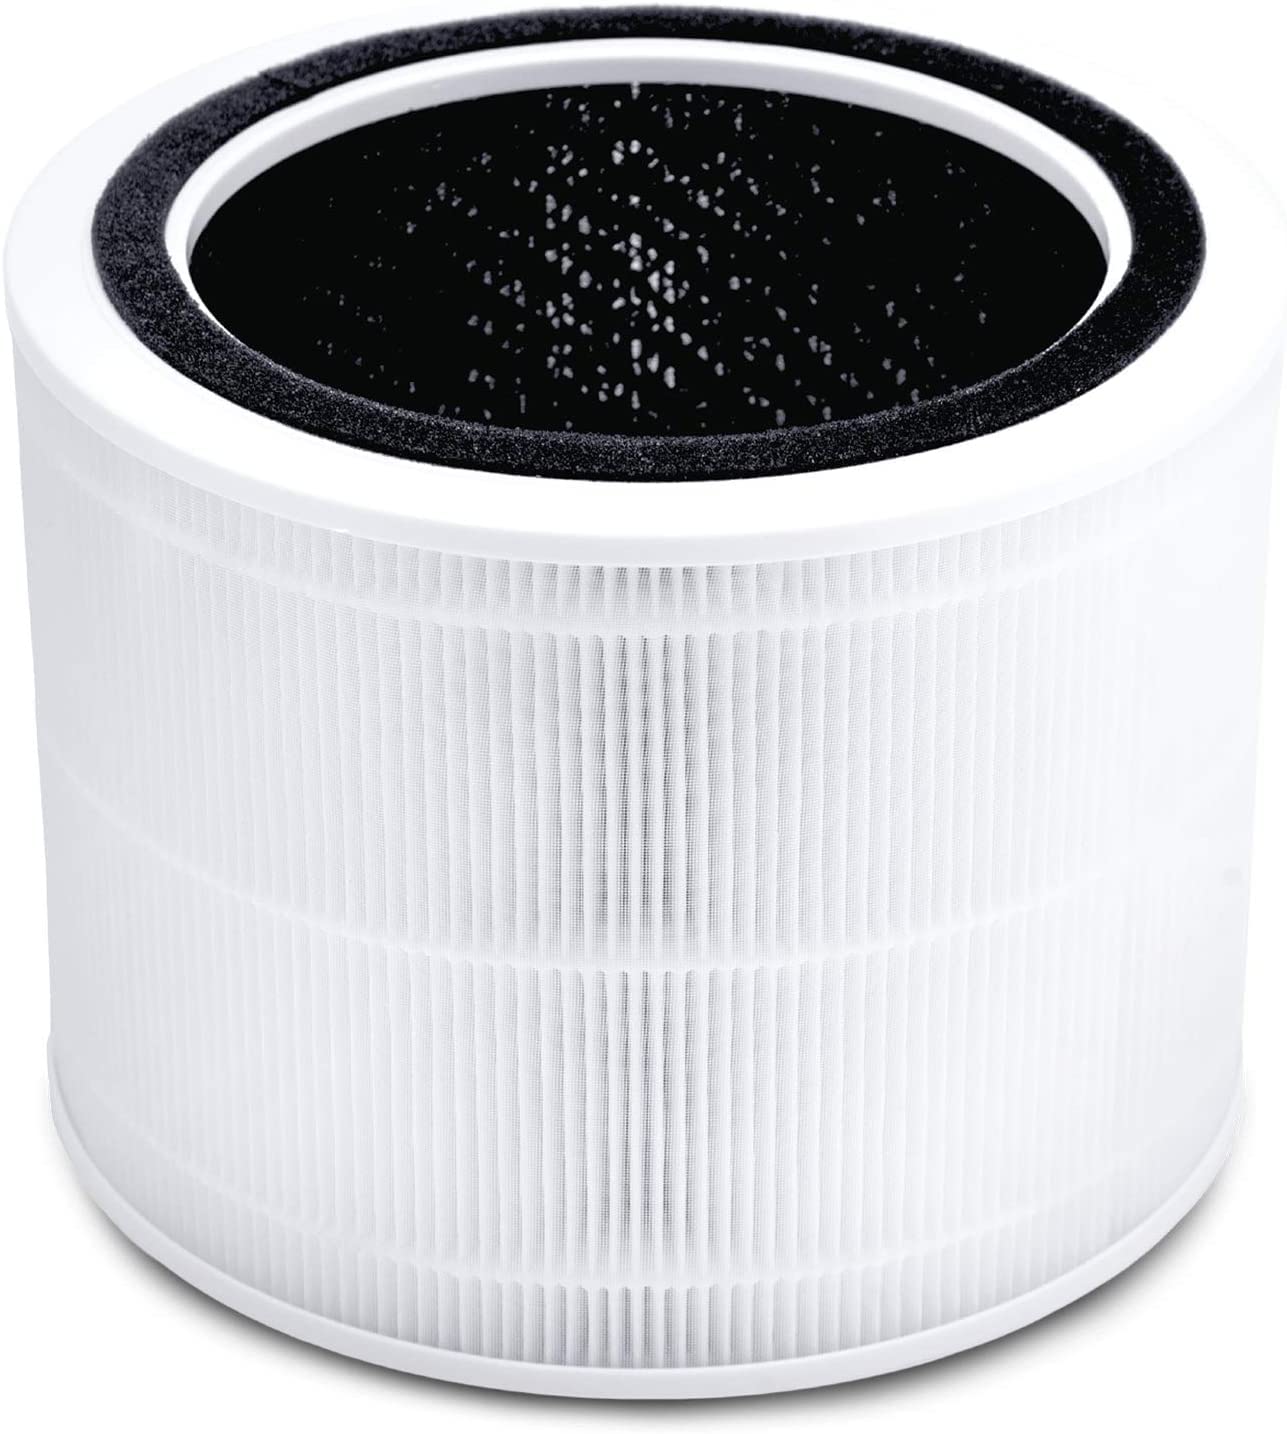 LEVOIT Air Purifier Replacement Filter, 3-in-1 HEPA, High-Efficiency Activated Carbon, Core 200S-RF, White